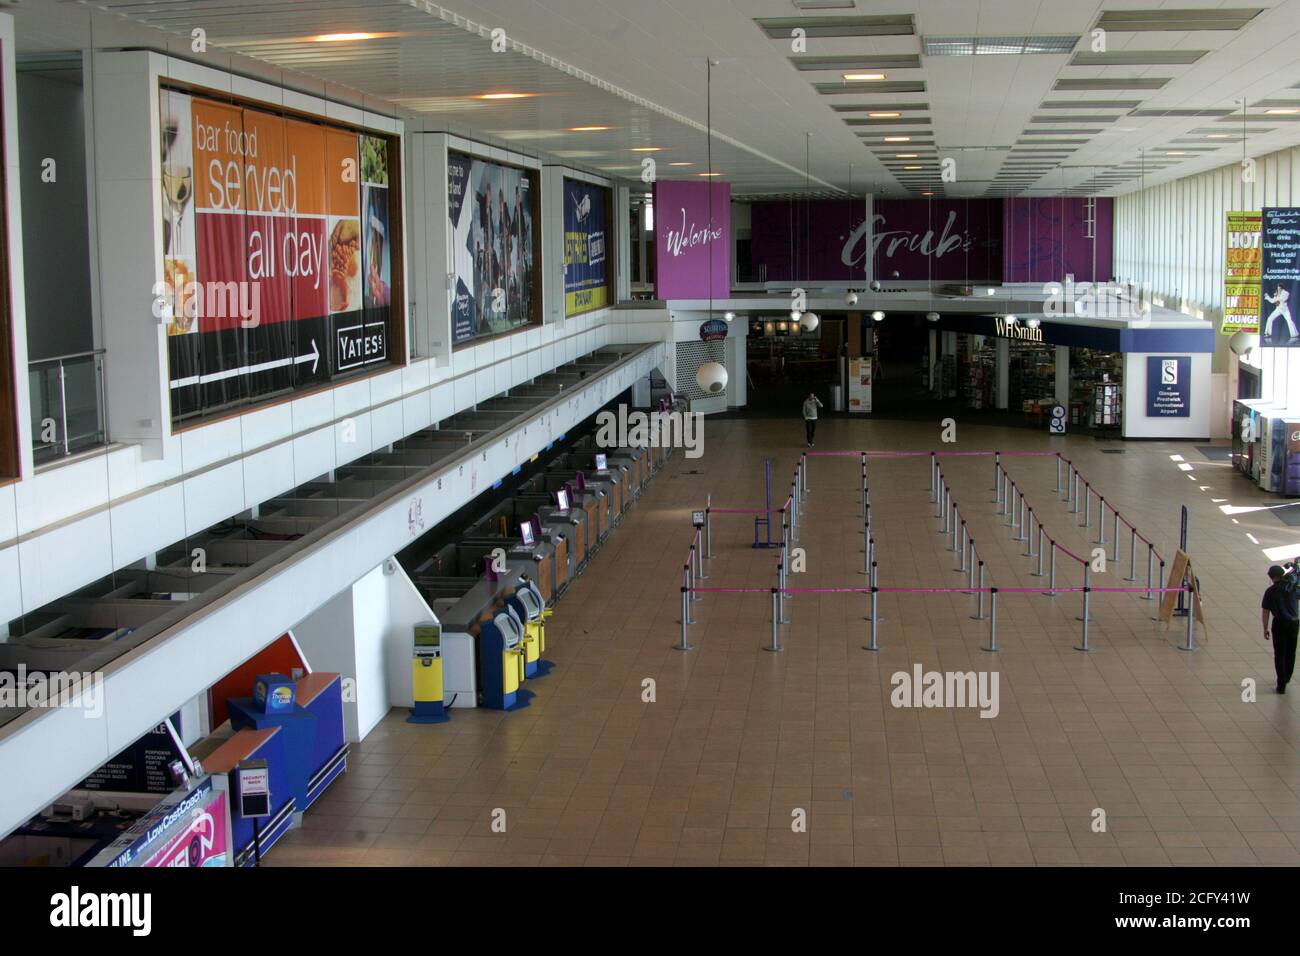 Glasgow Prestwick Airport, Ayrshire, Scotland. 16 April 2010, Terminal Building empty as a result of Icelandic Volcanic Ash closing UK airspace. Concorse empty with solitary figure on phone Stock Photo